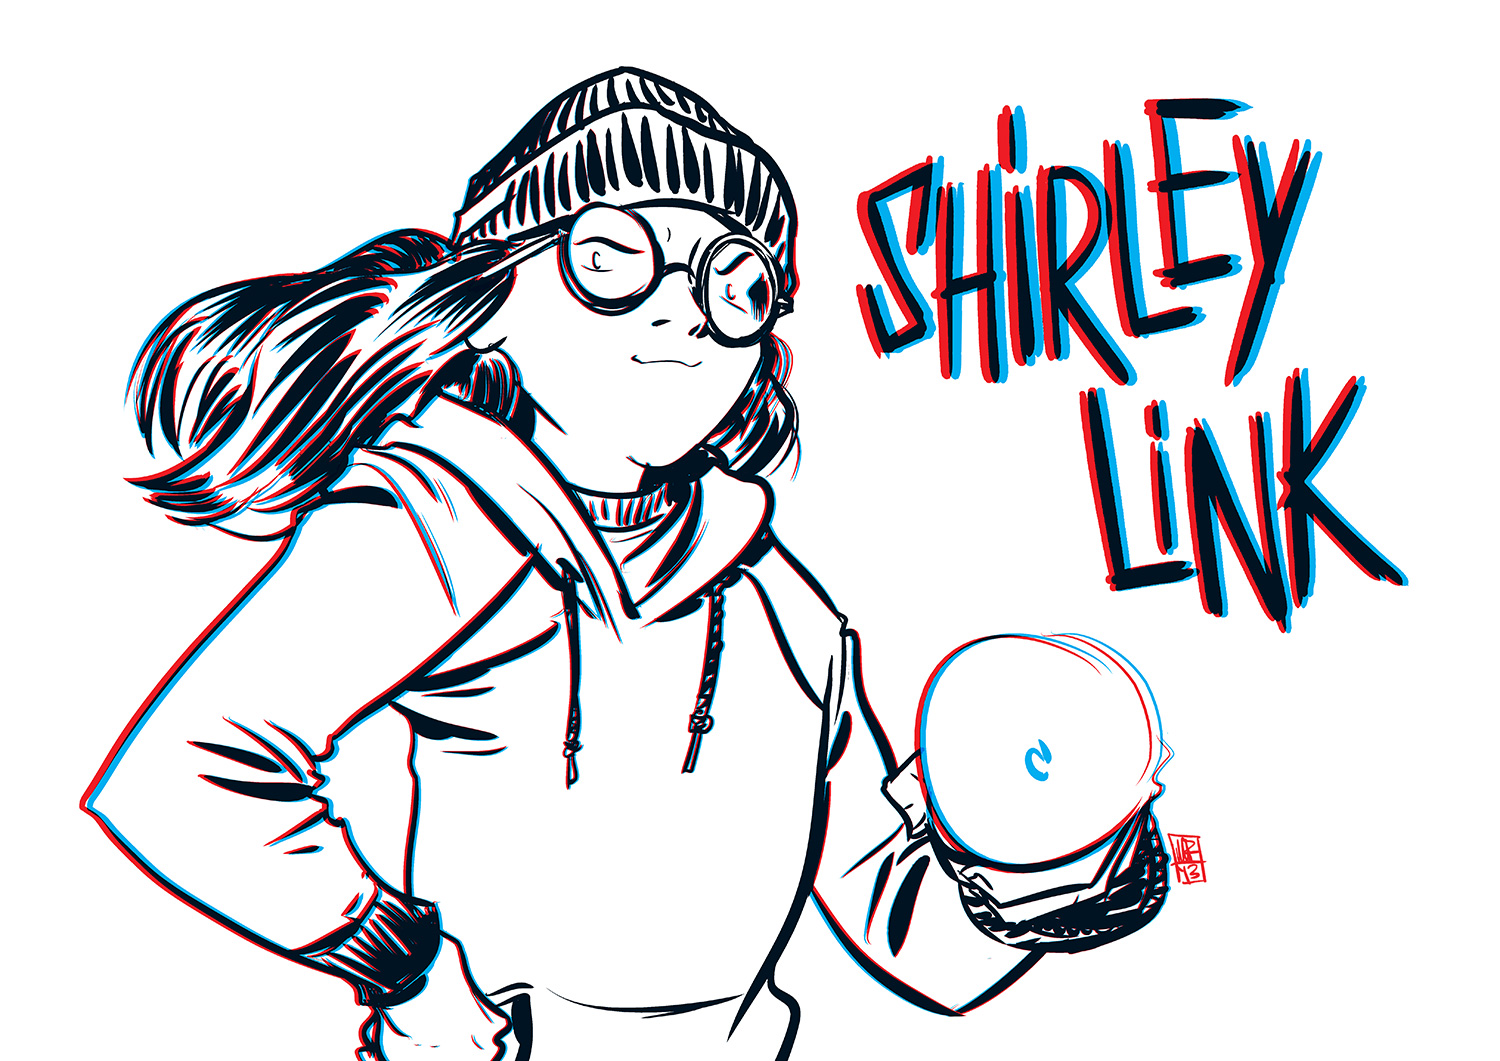 Enter the BookElves Anthology giveaway and read the latest Shirley Link!